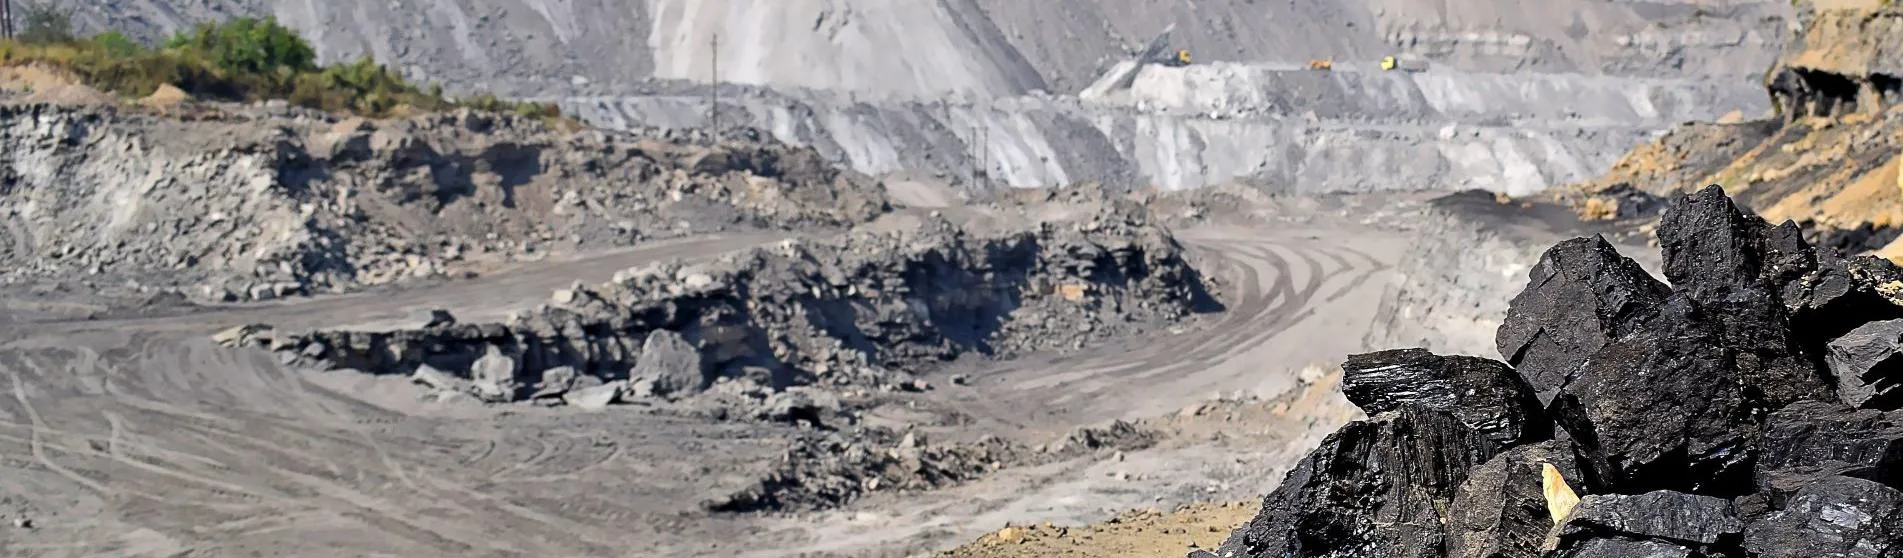 Coal mining project, West Bengal India